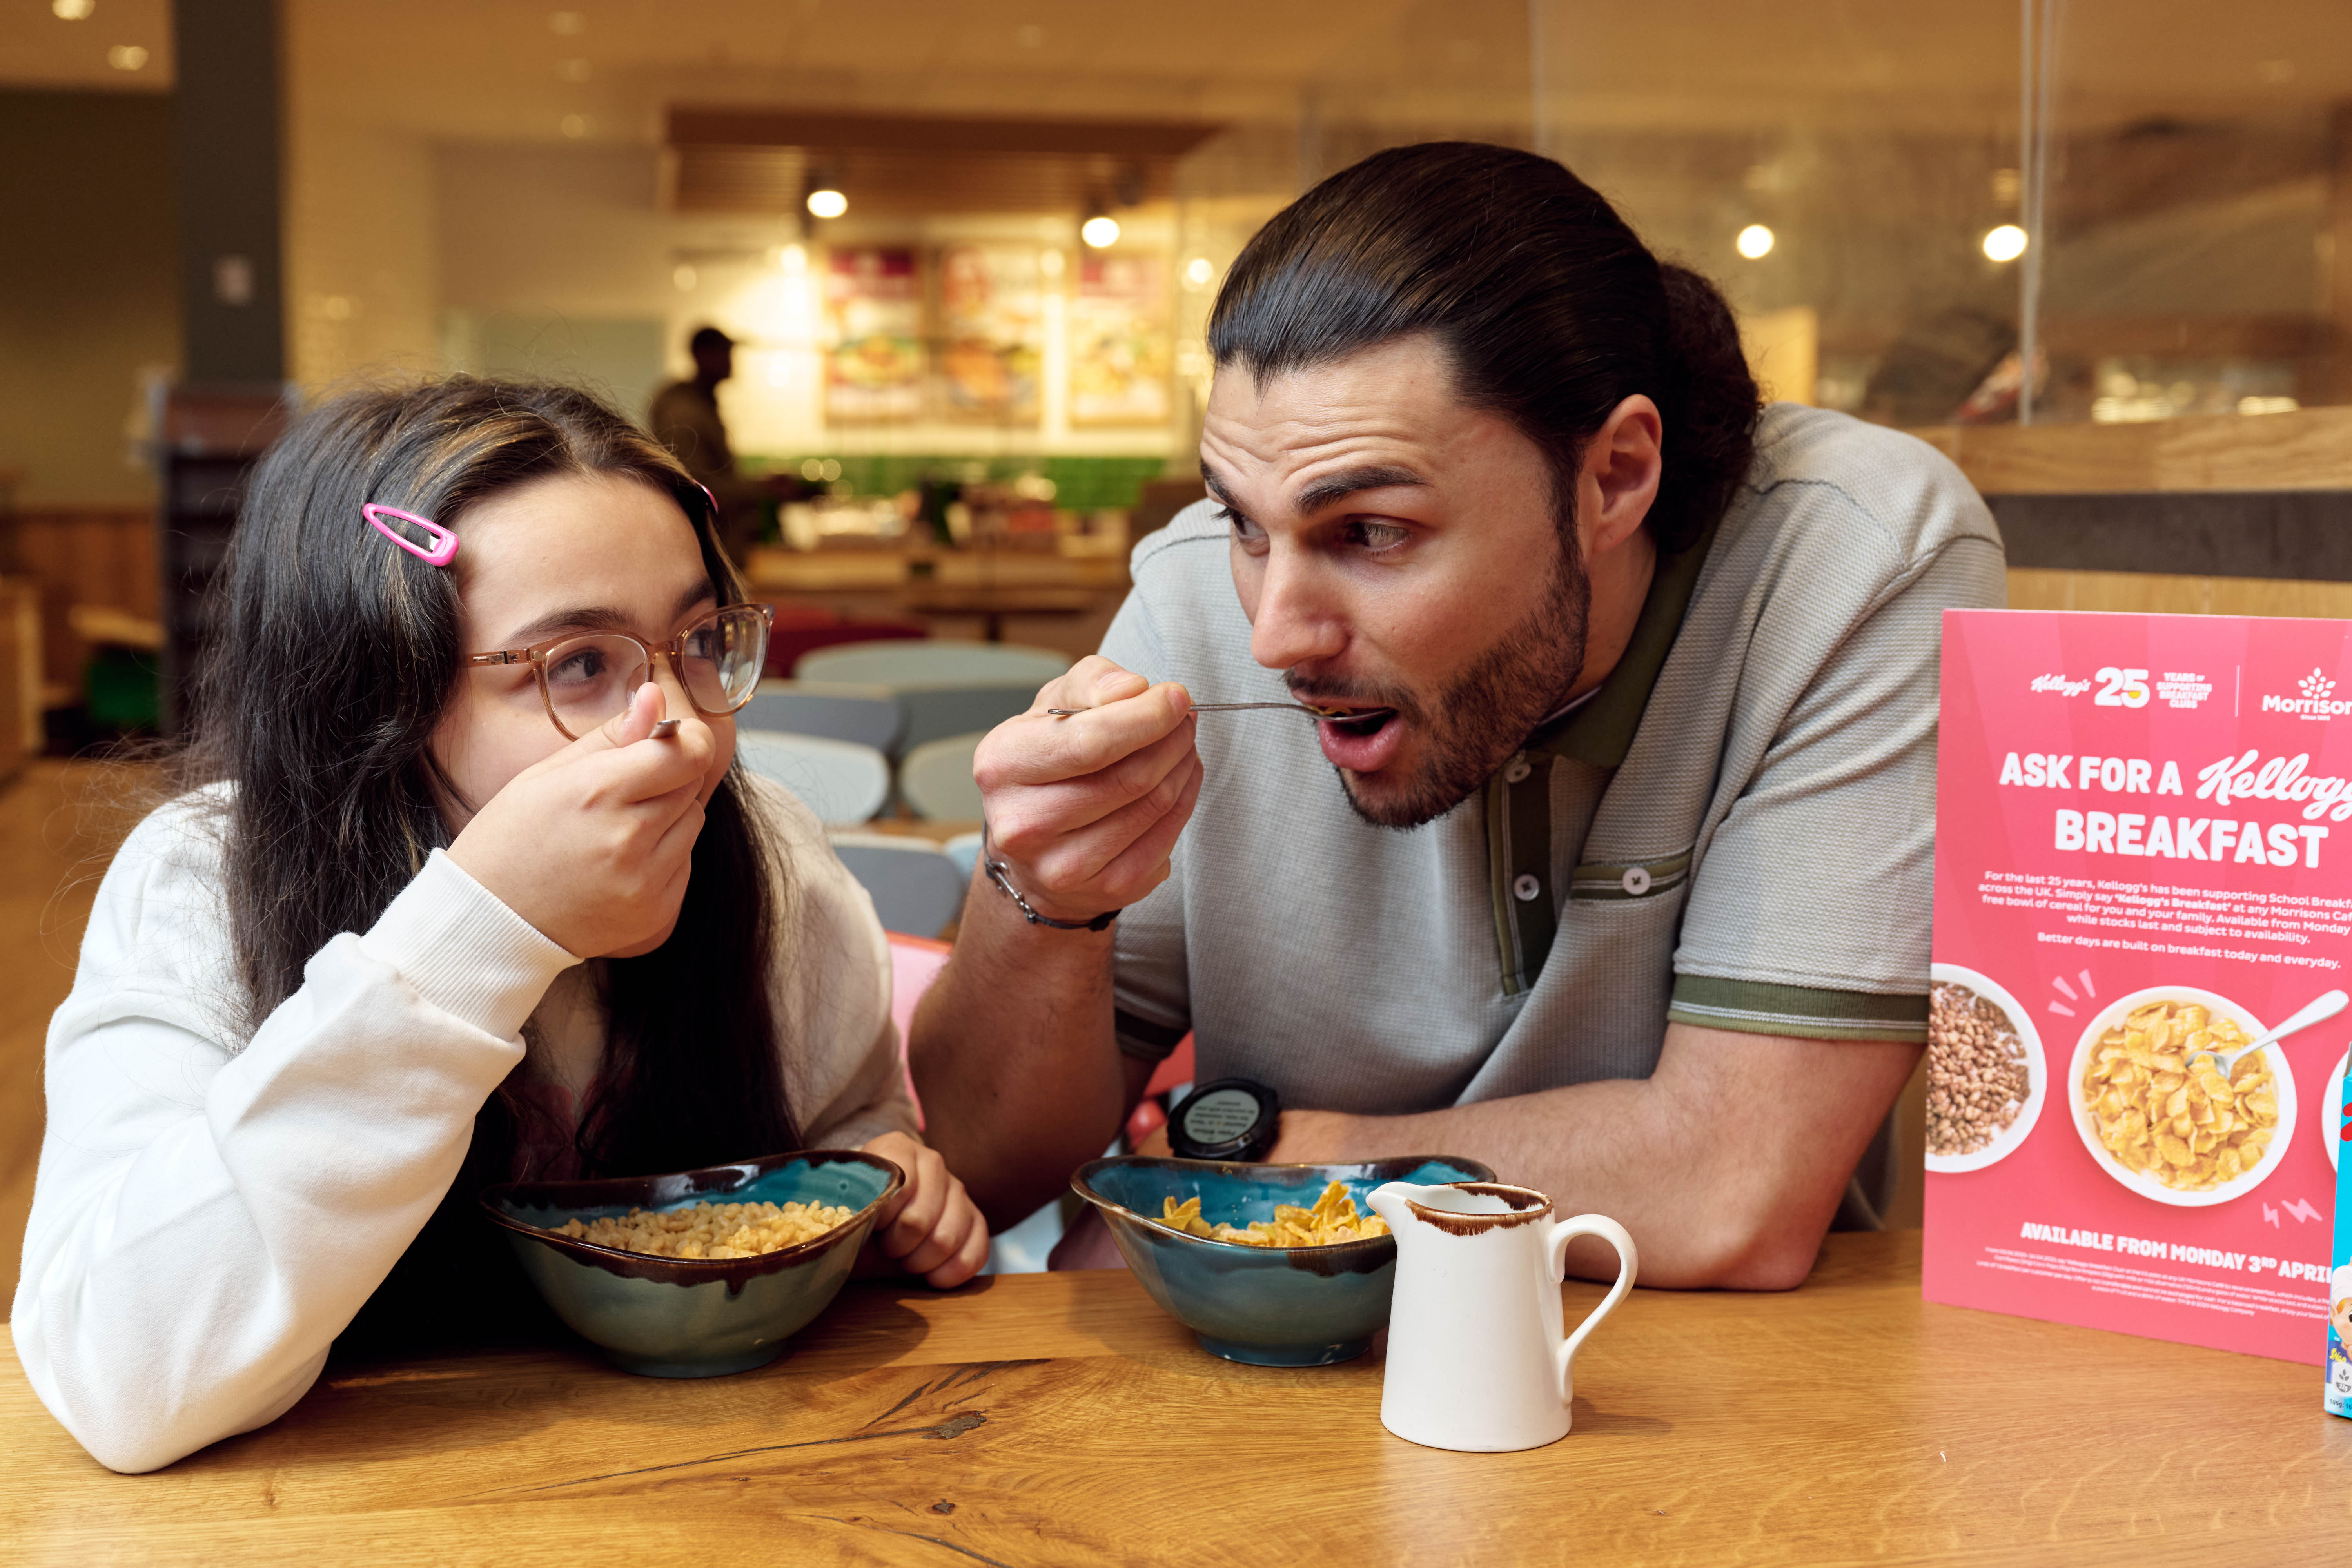 Morrisons teams up with Kellogg's to launch a free breakfast club this Easter